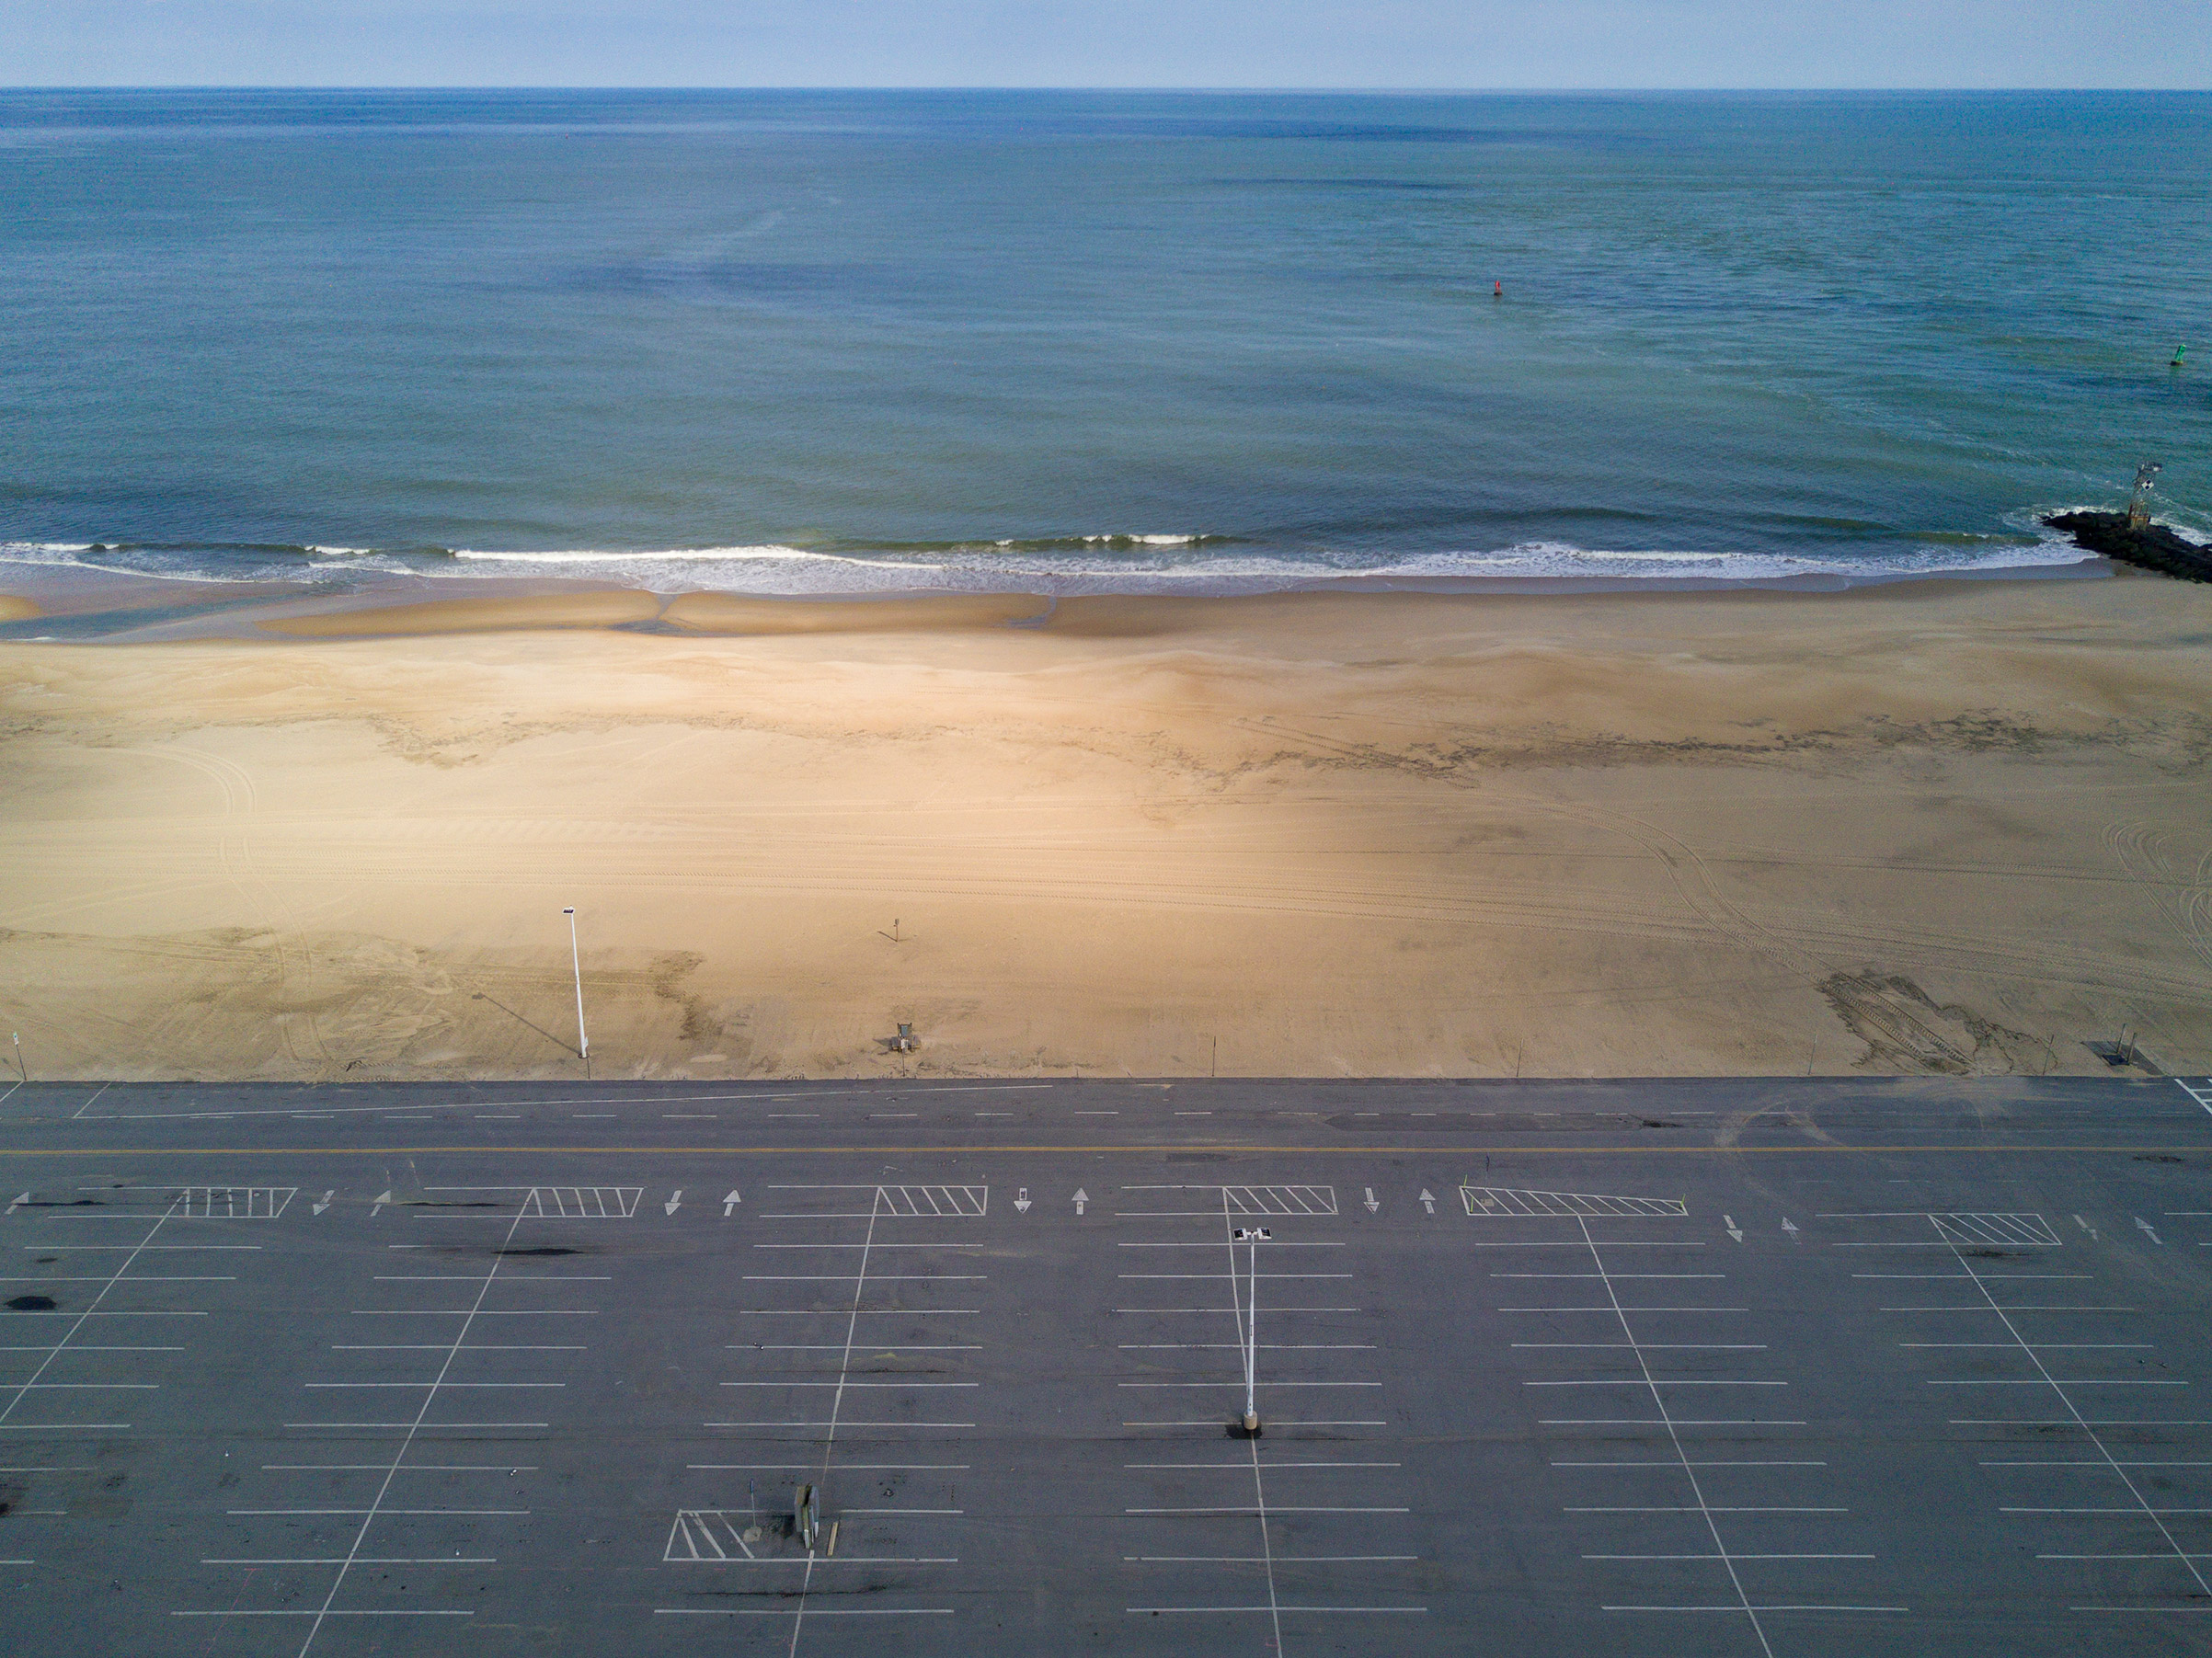 An empty parking lot in the beach town of Ocean City, Md., on April 16. (Peter van Agtmael—Magnum Photos for TIME)